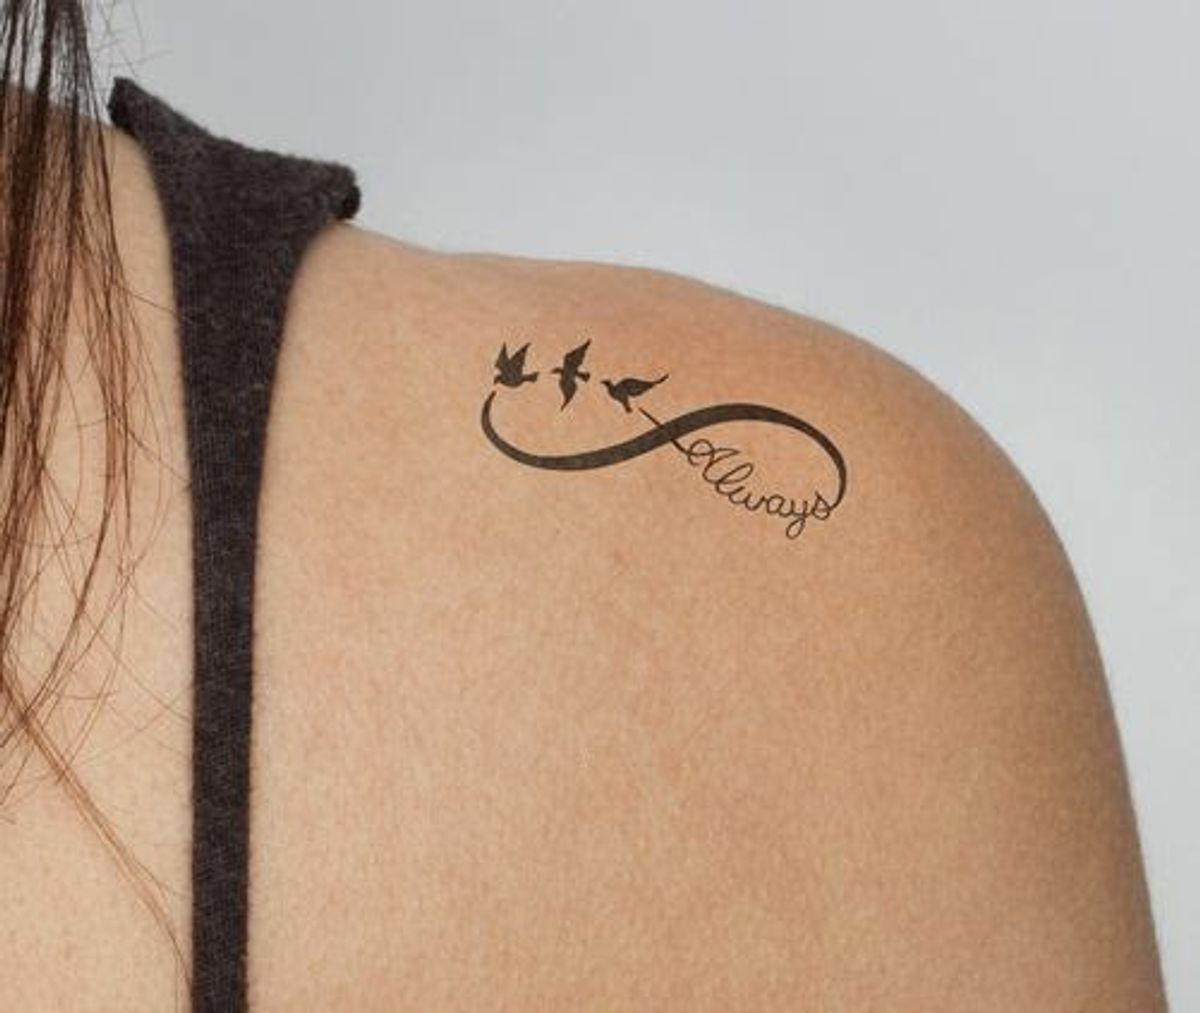 5 Tattoos That Tattoo Artists Hate The Most